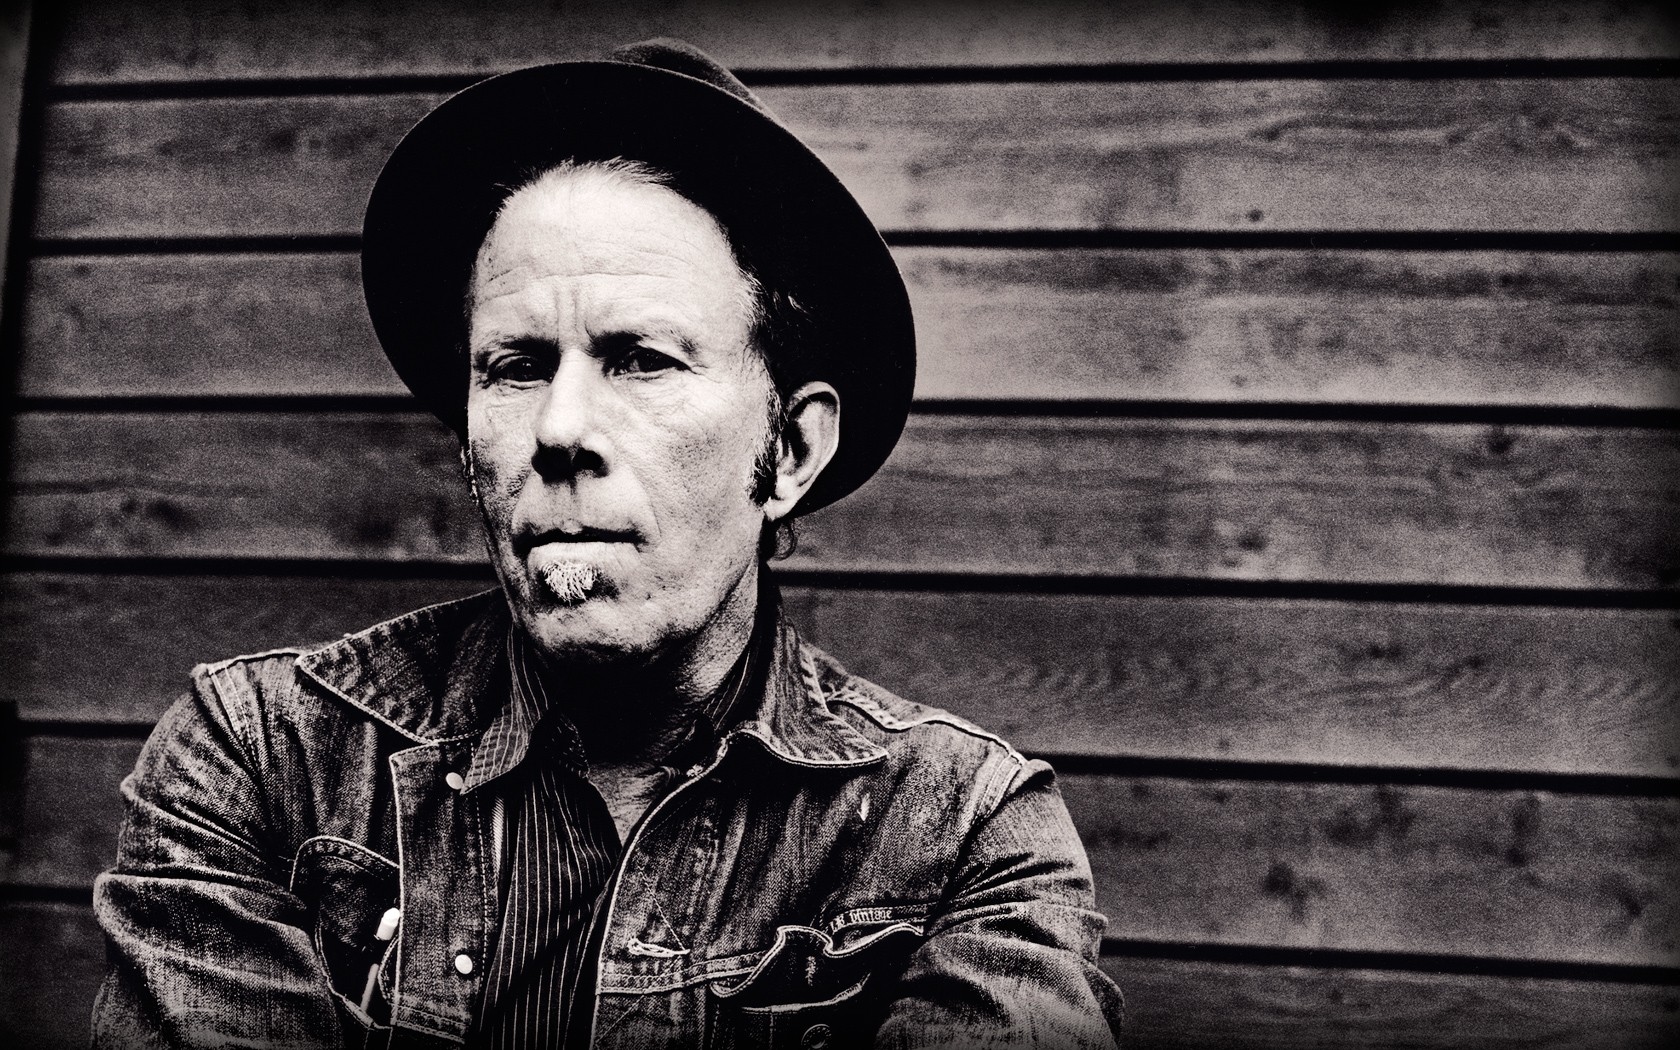 Tom Waits Musician Songwriters Actor Singer Monochrome Sepia 1680x1050